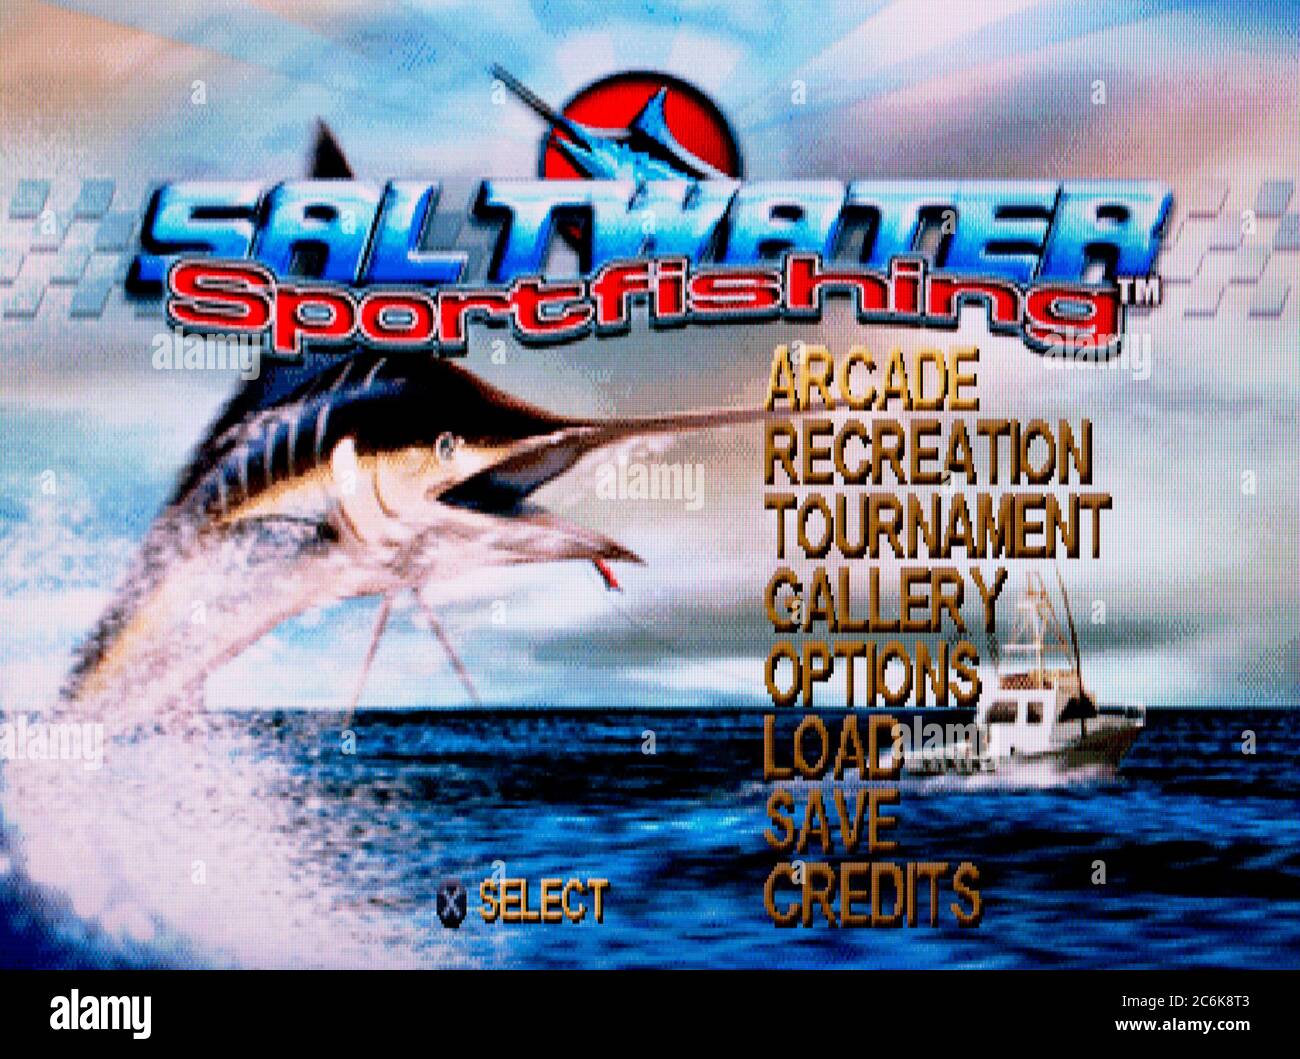 https://c8.alamy.com/comp/2C6K8T3/saltwater-sport-fishing-sony-playstation-1-ps1-psx-editorial-use-only-2C6K8T3.jpg